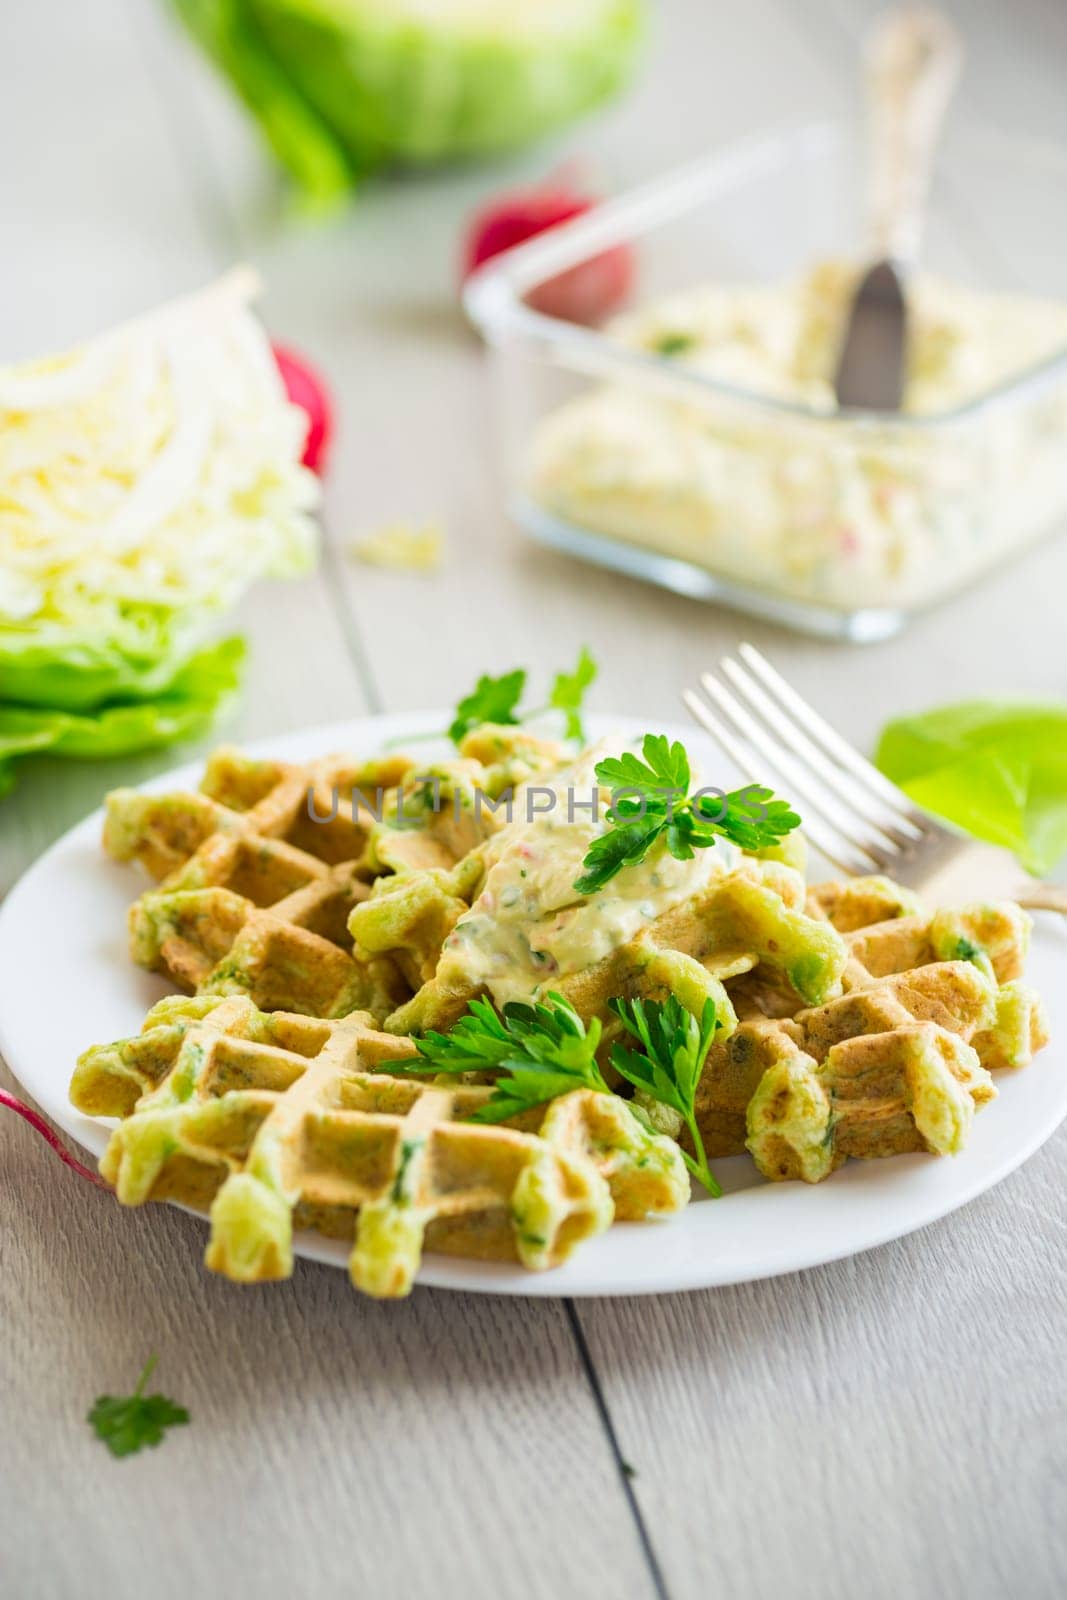 vegetable cabbage waffles fried with herbs.